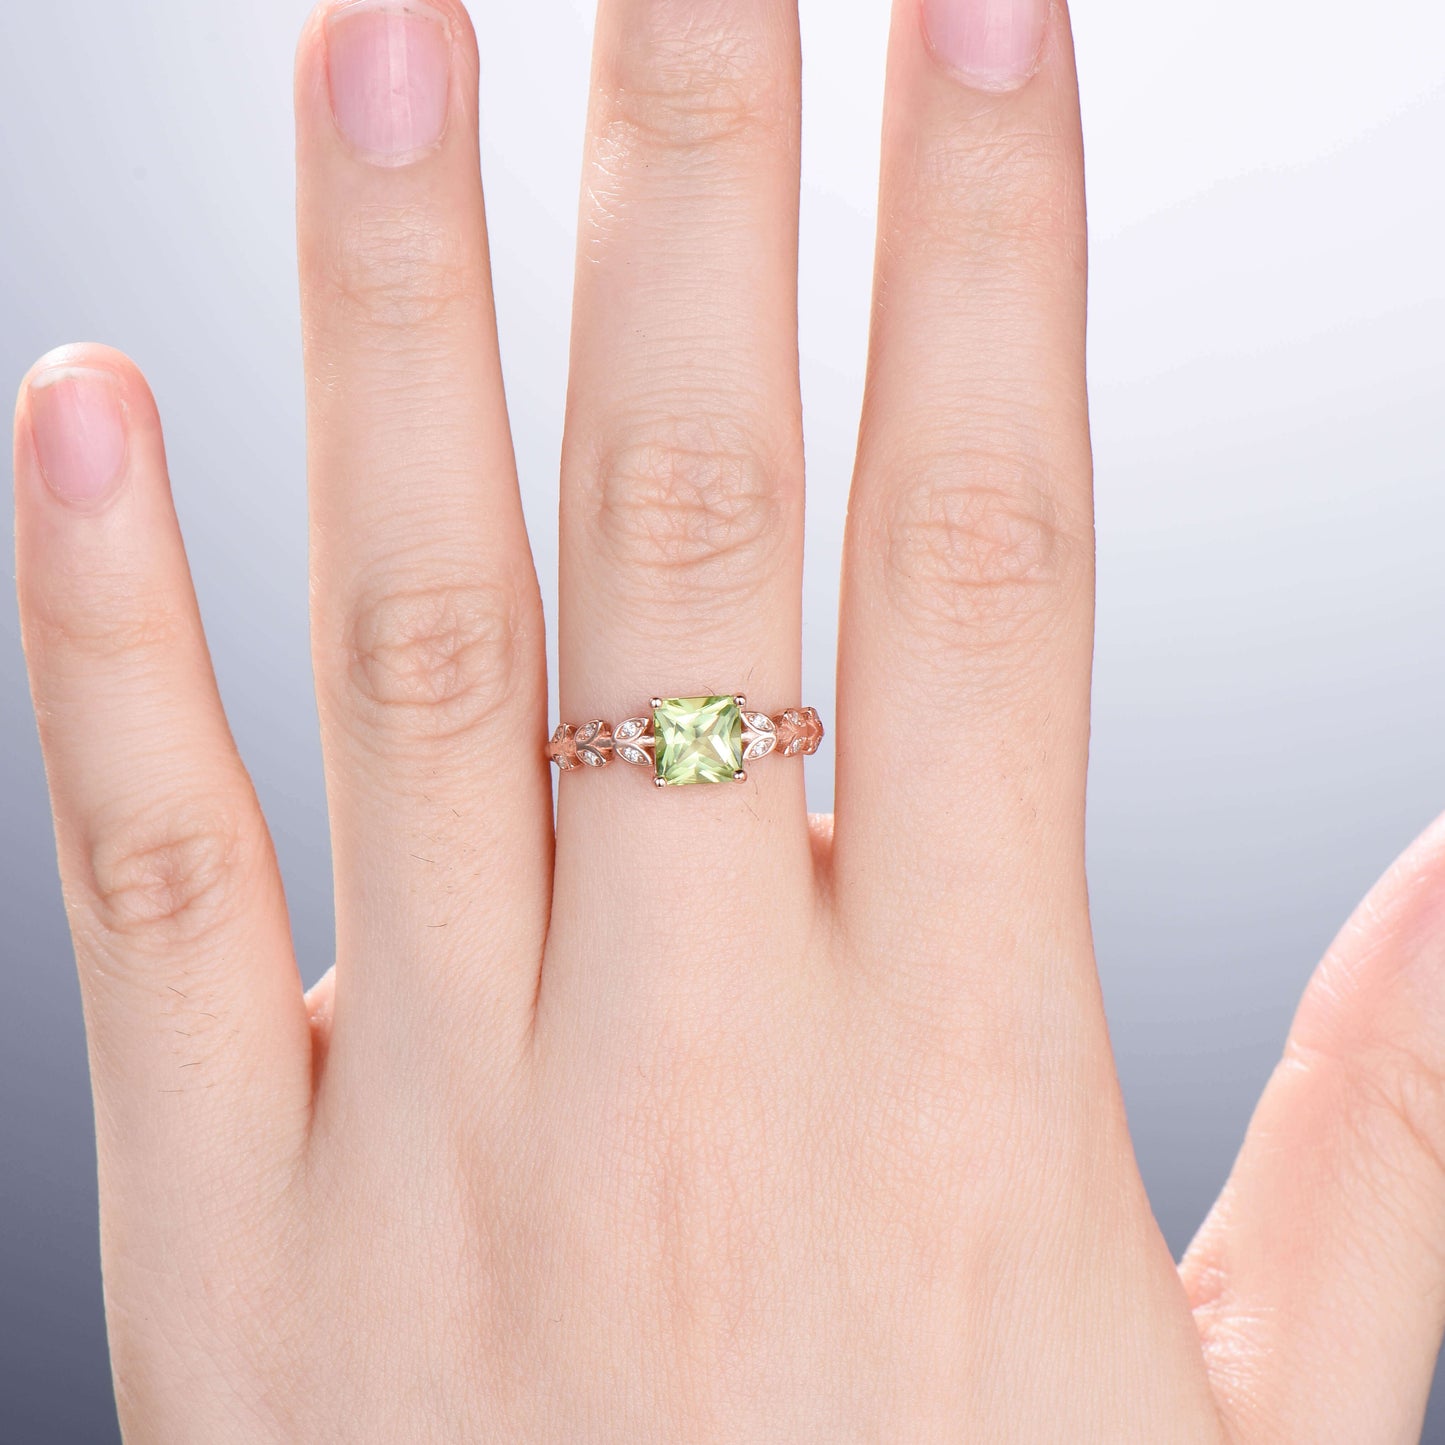 Princess cut peridot engagement ring leaf peridot and diamond wedding ring for women unique vintage style moissanite ring for women jewelry - PENFINE